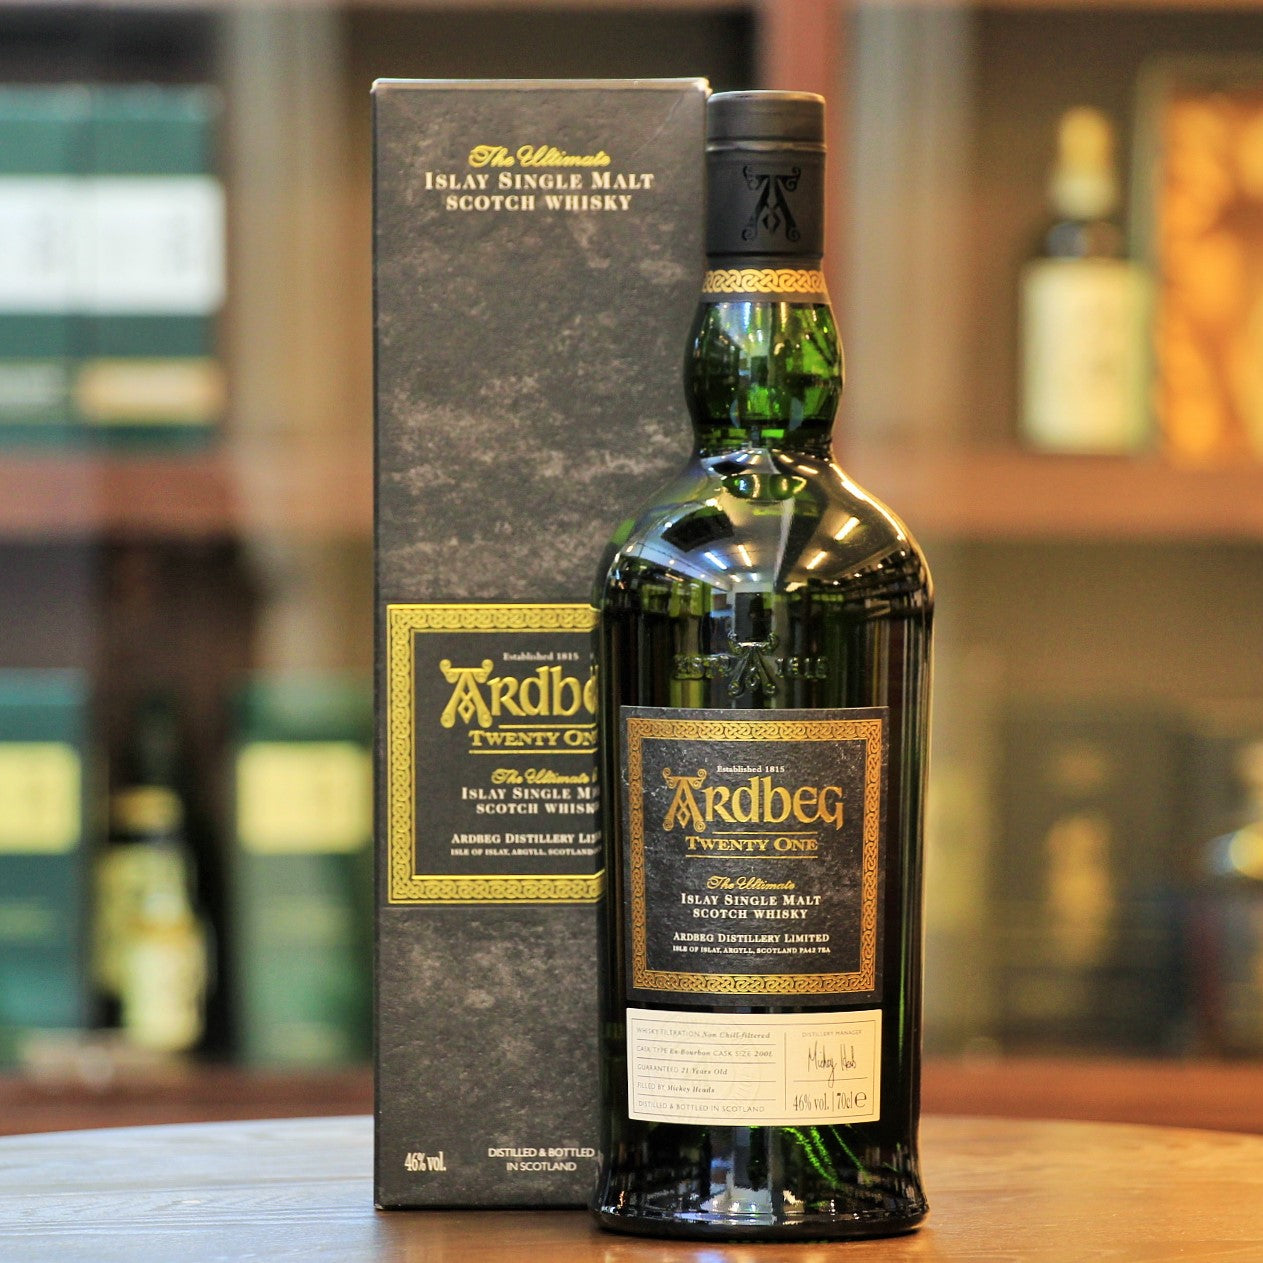 A rare single malt scotch whisky from the Ardbeg distillery on Islay in Scotland. This bottle has been filled by Micky Heads, the Master Distiller and matured in bourbon barrels for 21 years. Now available on Mizunara The Shop in Hong Kong